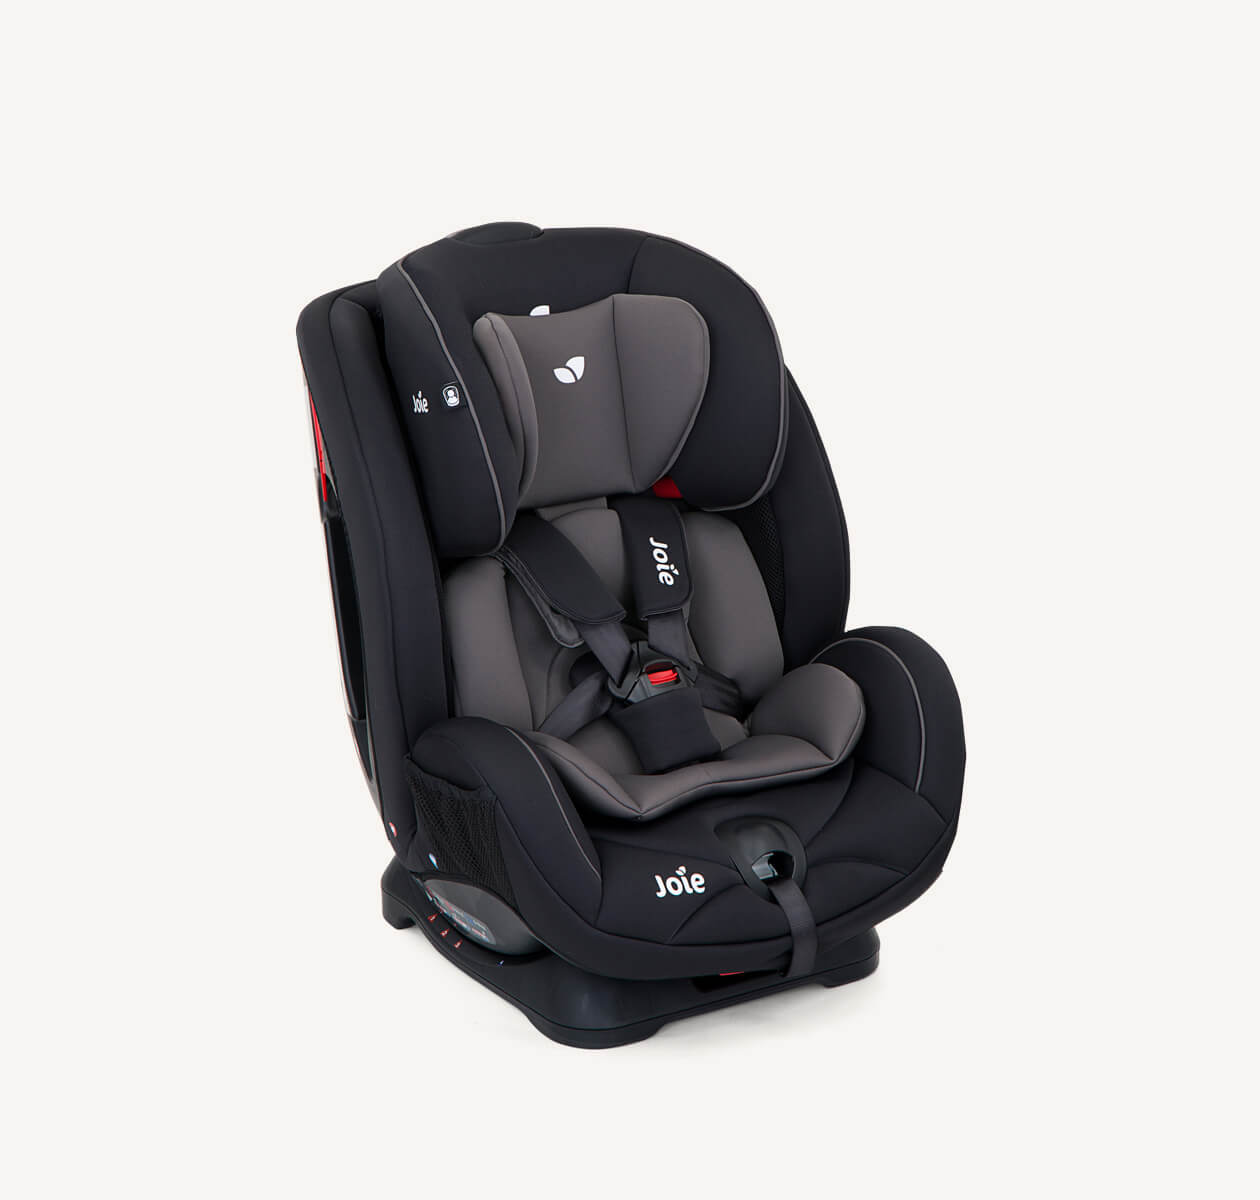 stages™ Car Seats coal